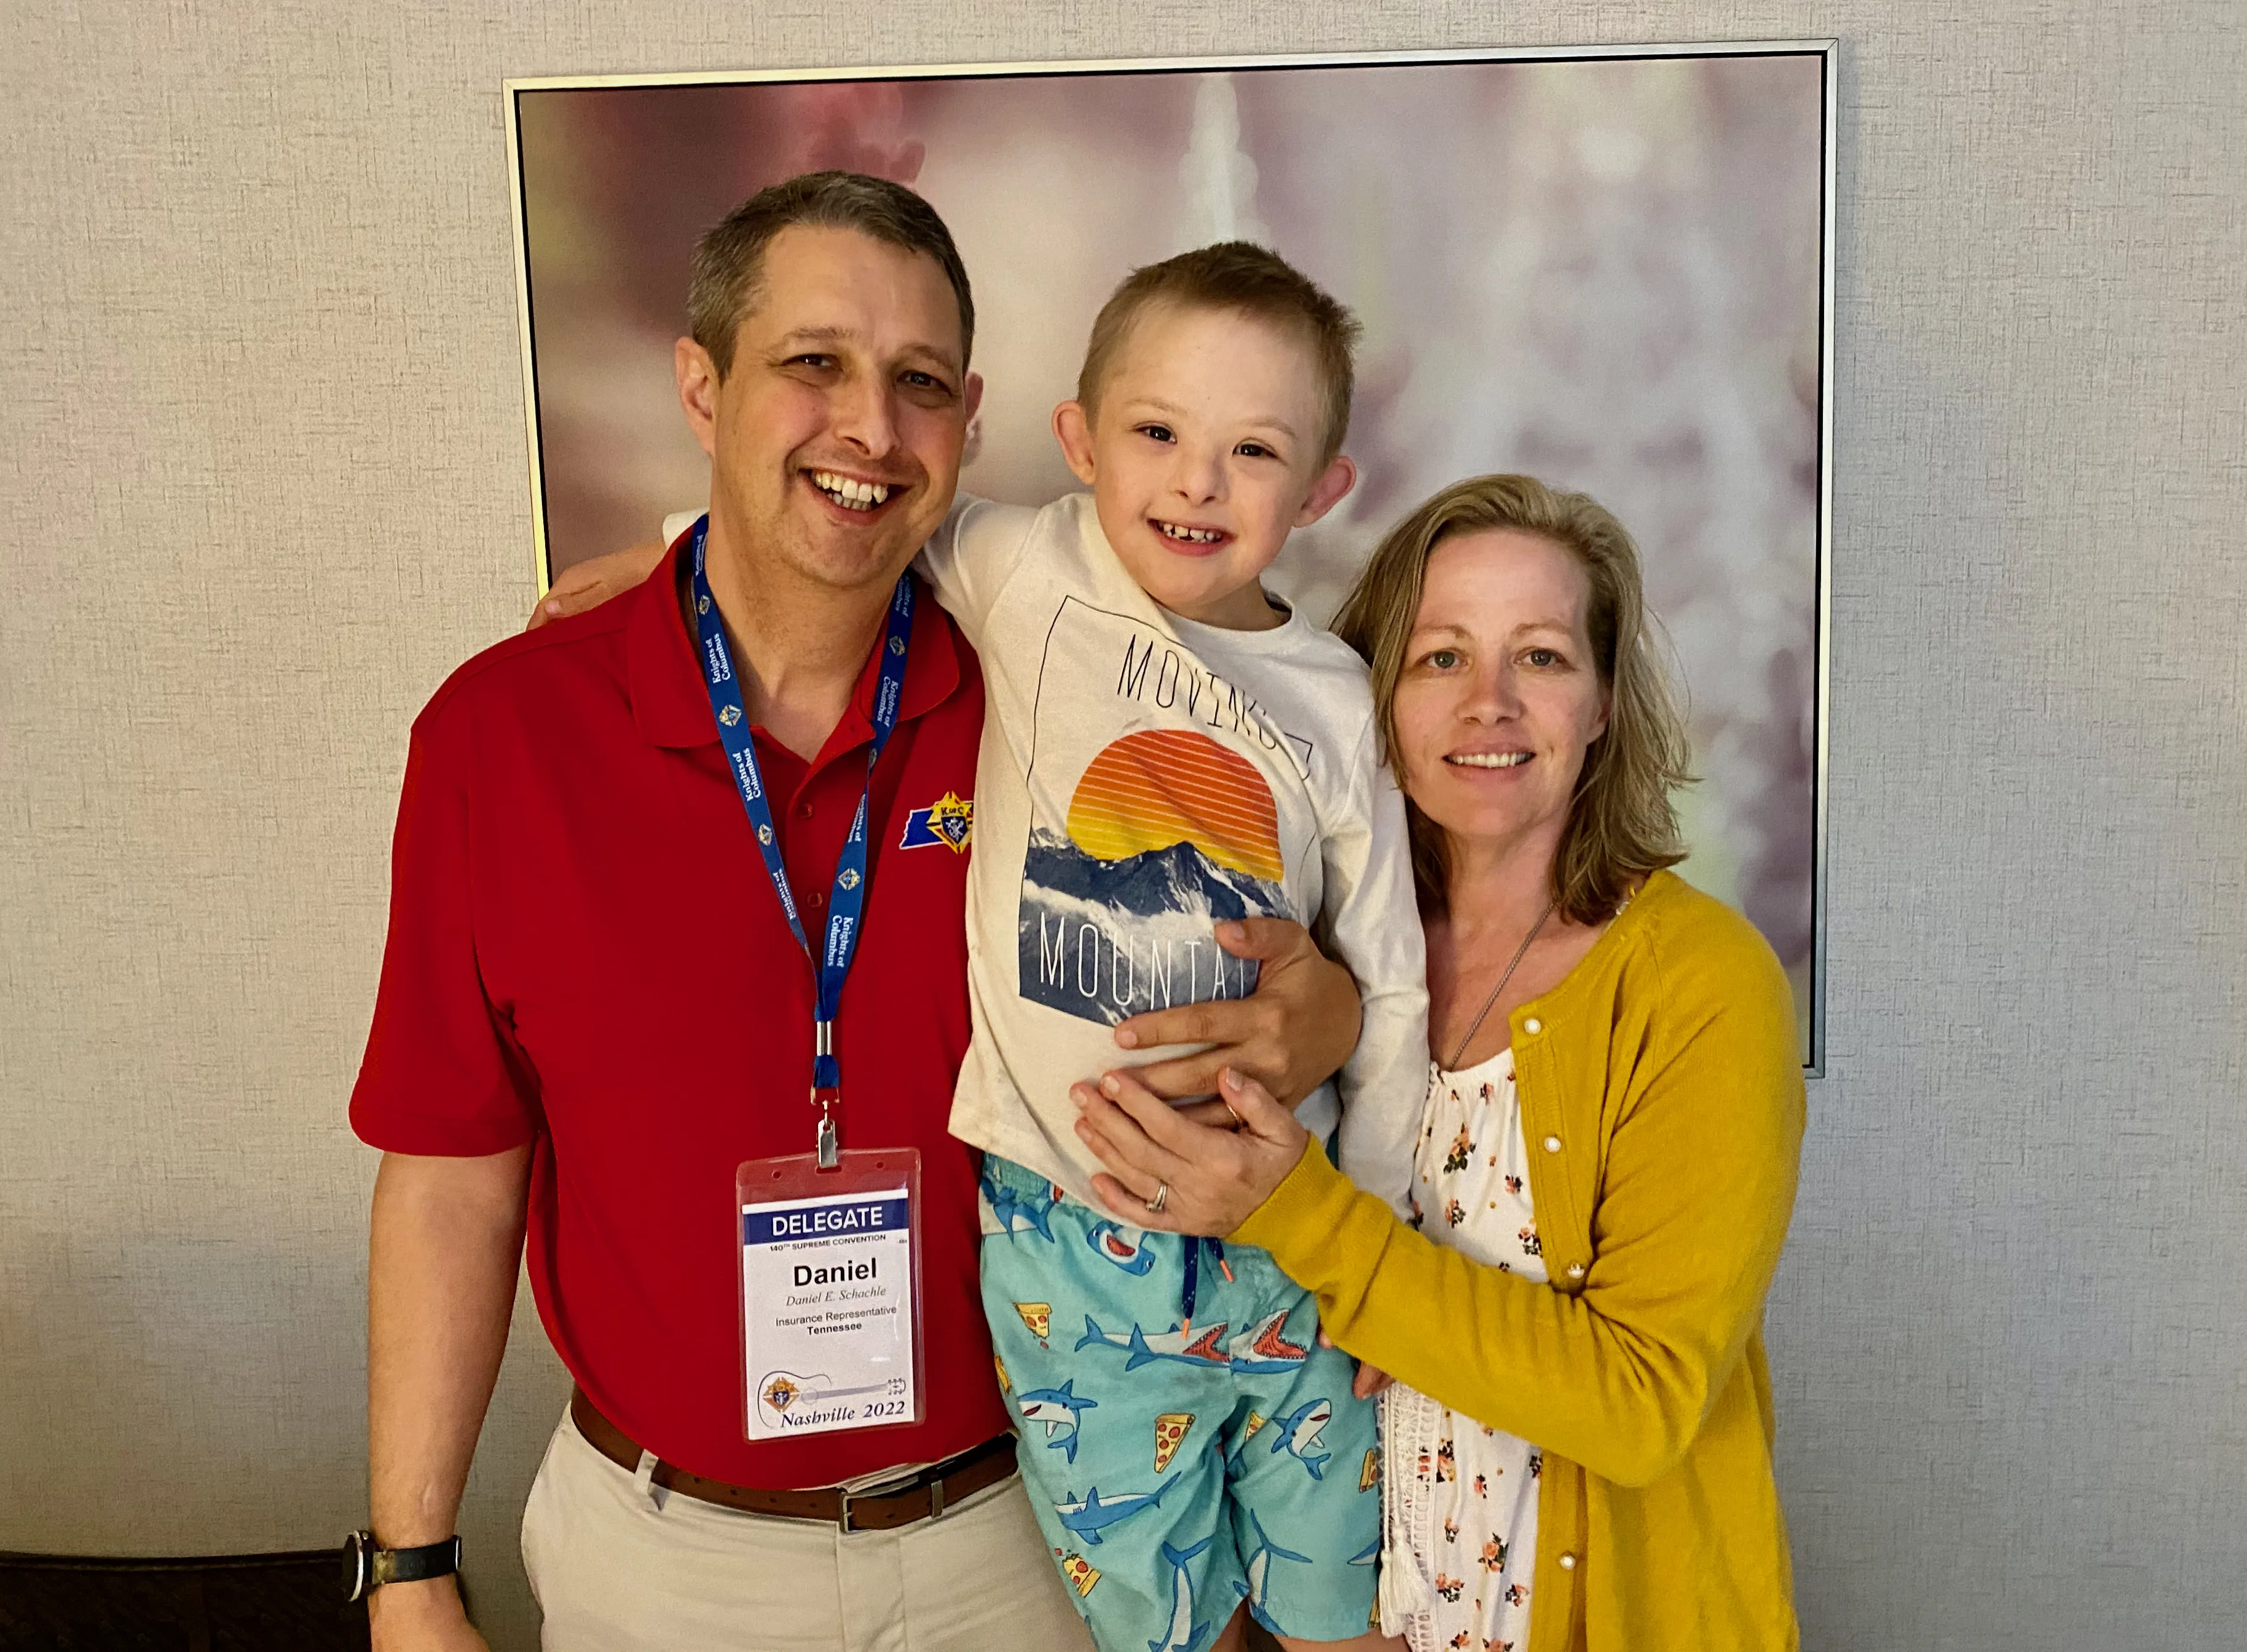 Daniel and Michelle Schachle with their son, Michael McGivney Schachle, 7, at the annual convention of the Knights of Columbus held Aug. 1-4, 2022, in Nashville, Tennessee.?w=200&h=150